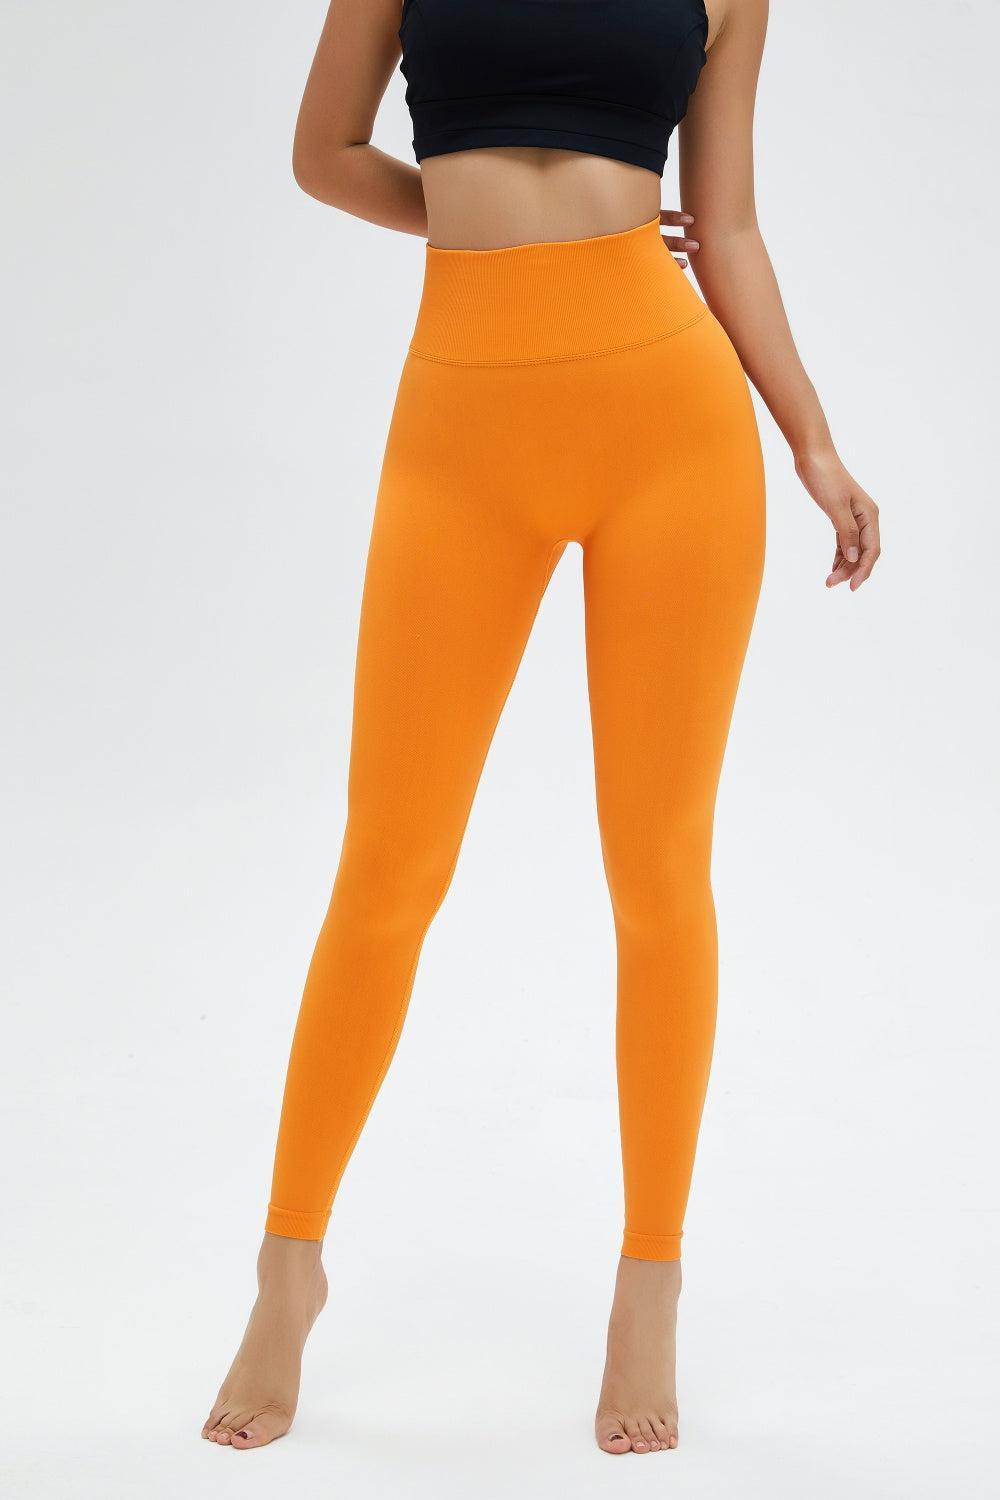 a woman in a black top and orange leggings